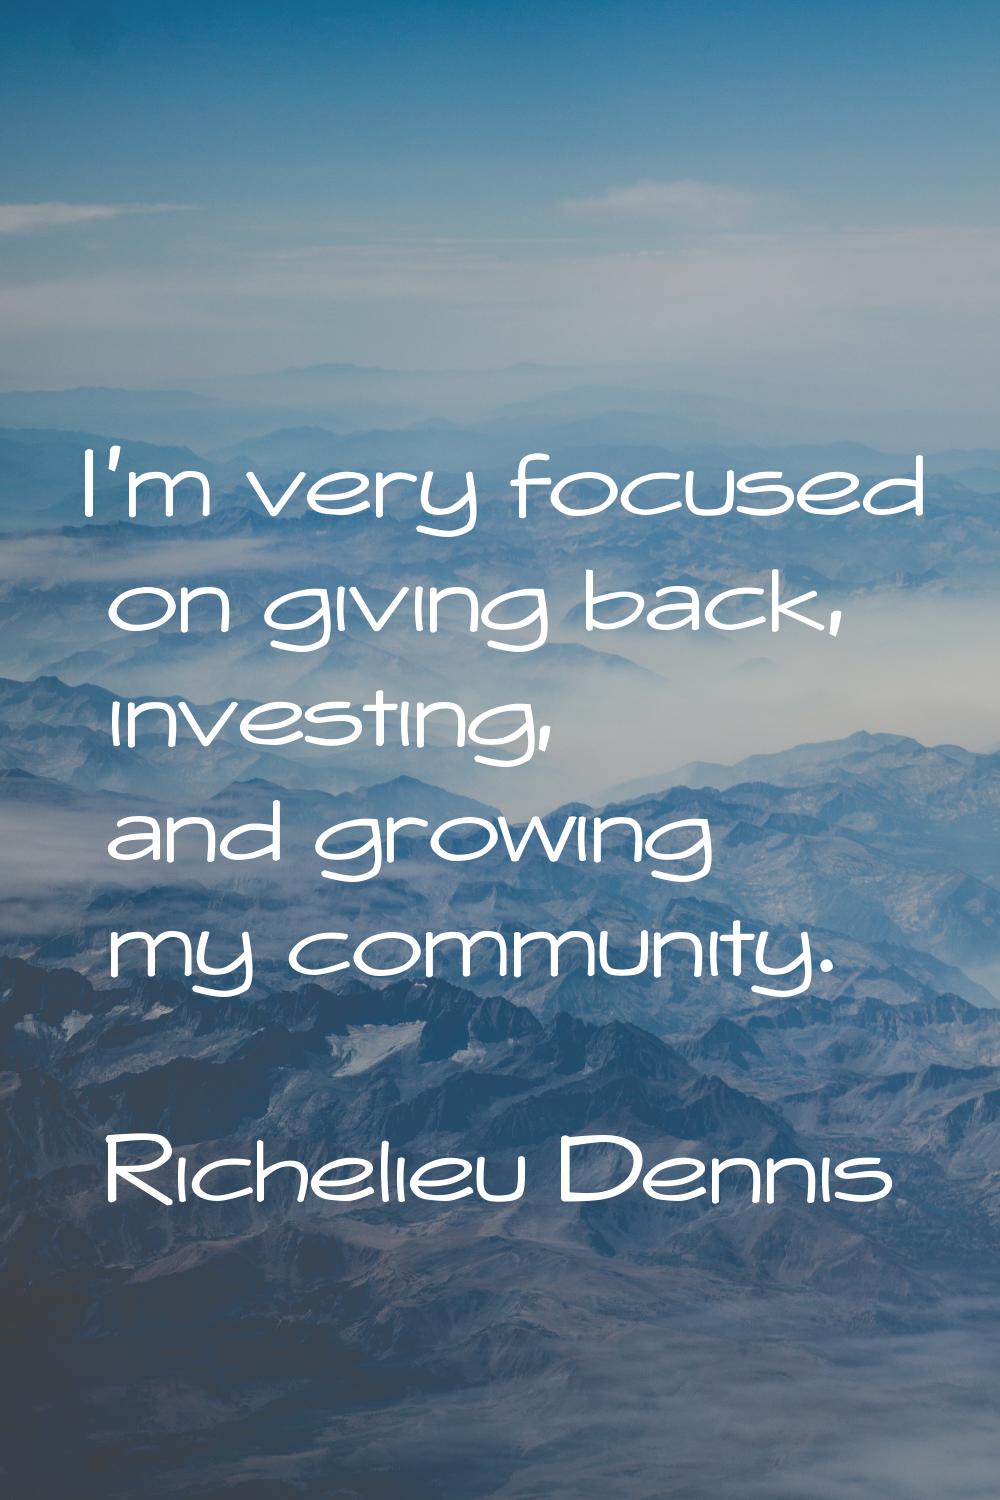 I'm very focused on giving back, investing, and growing my community.